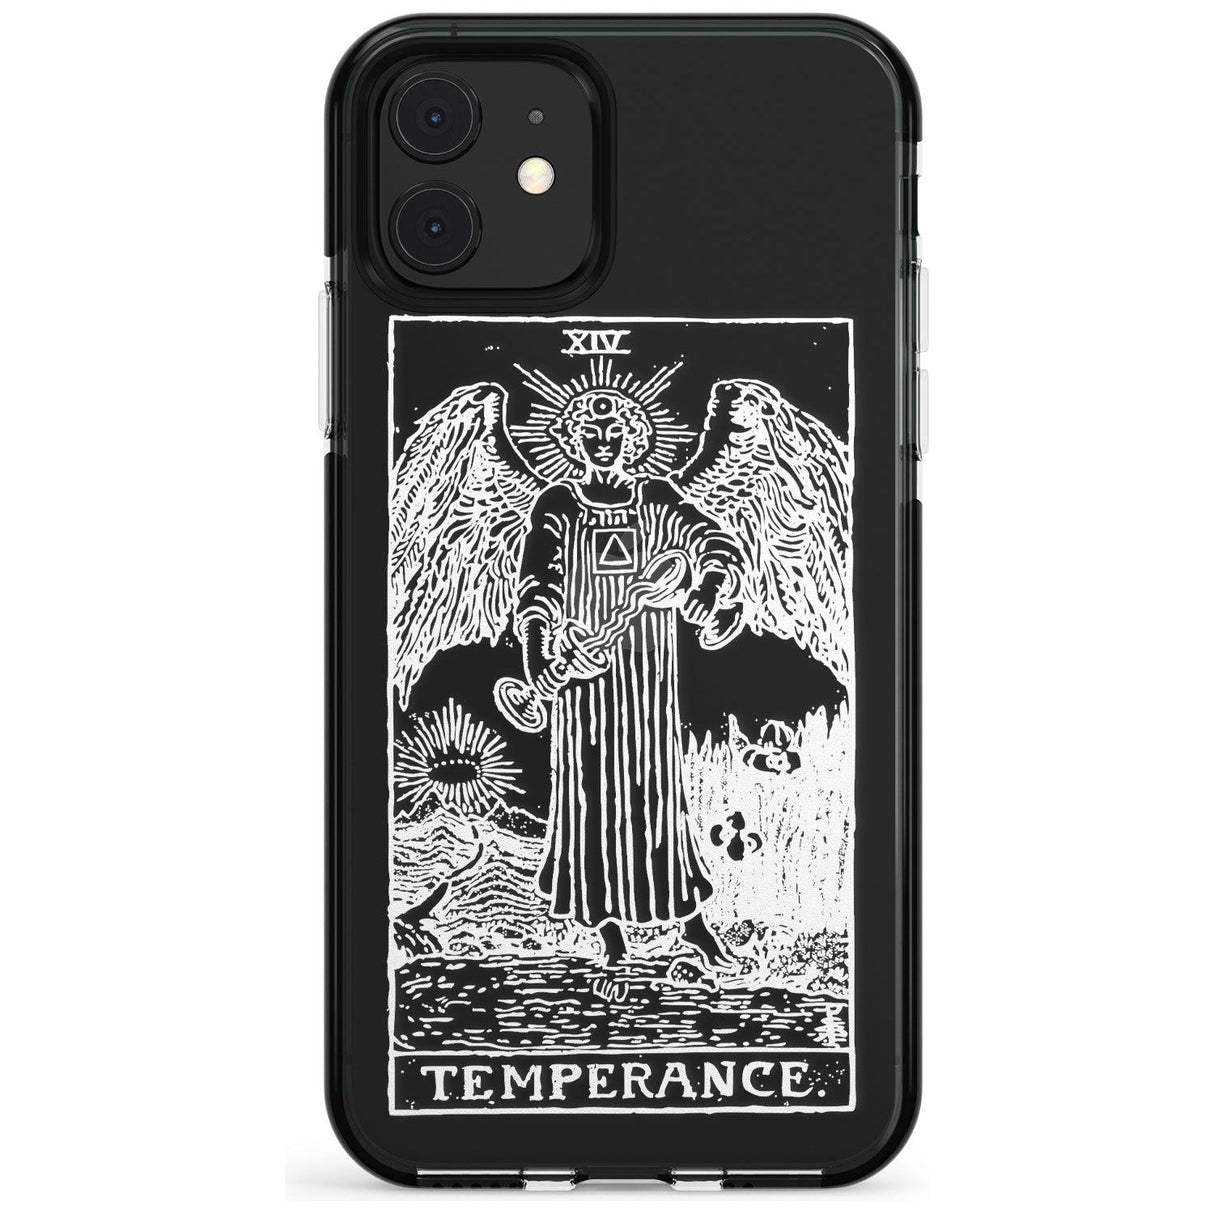 Temperance Tarot Card - White Transparent Pink Fade Impact Phone Case for iPhone 11 Pro Max